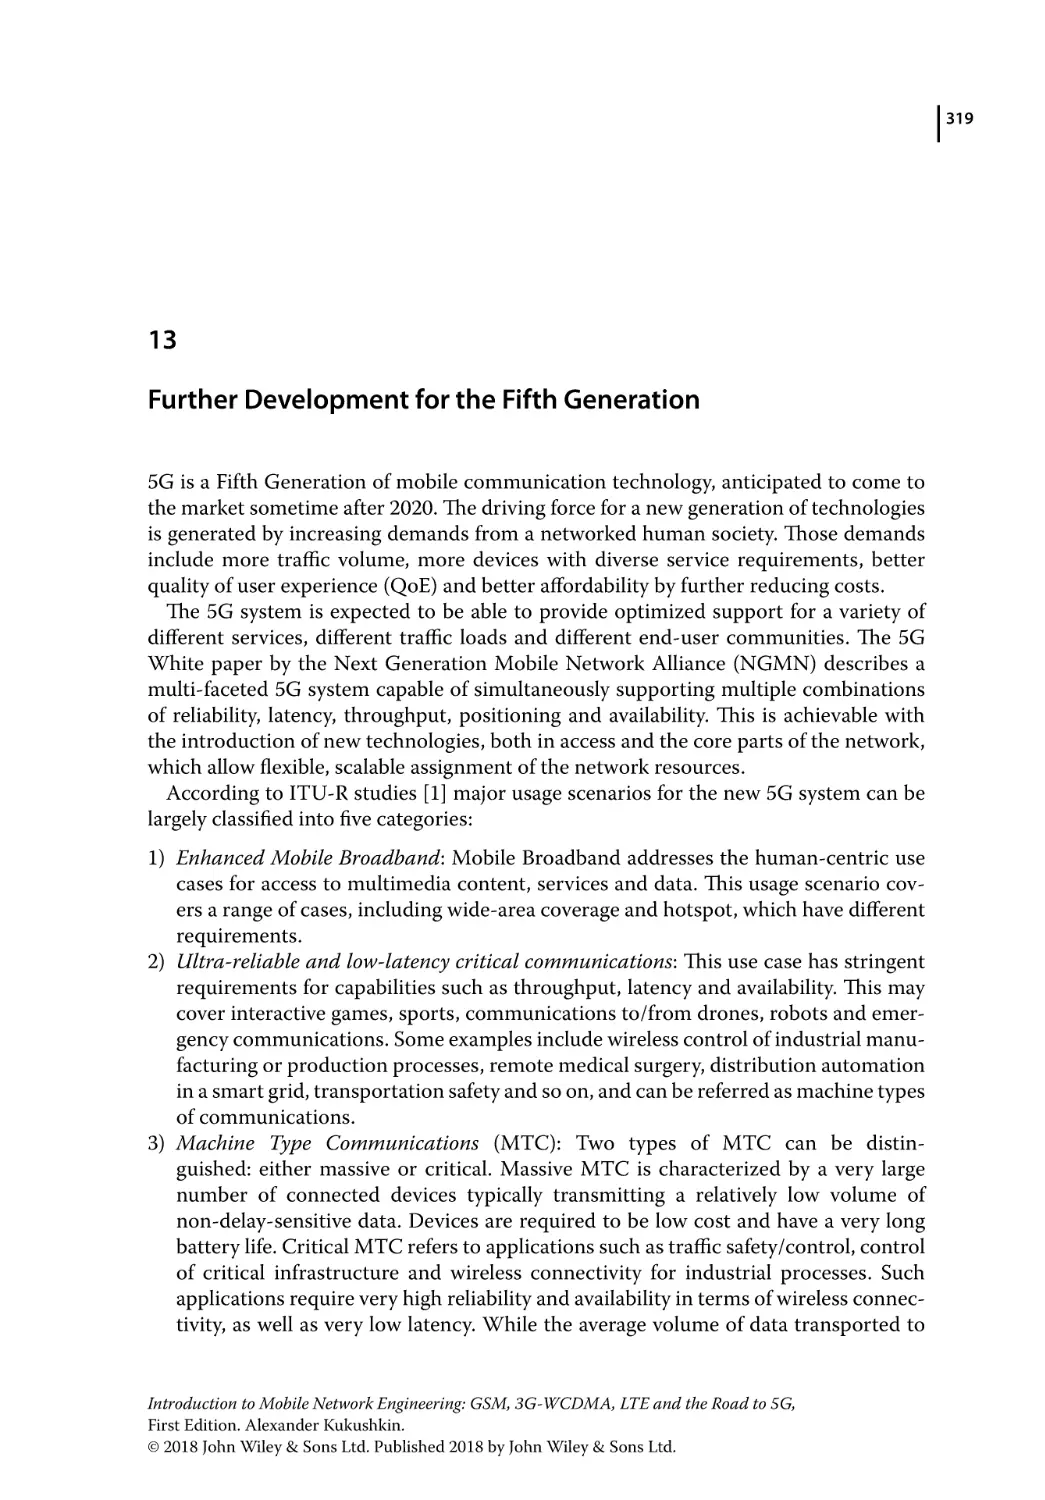 13 Further Development for the Fifth Generation